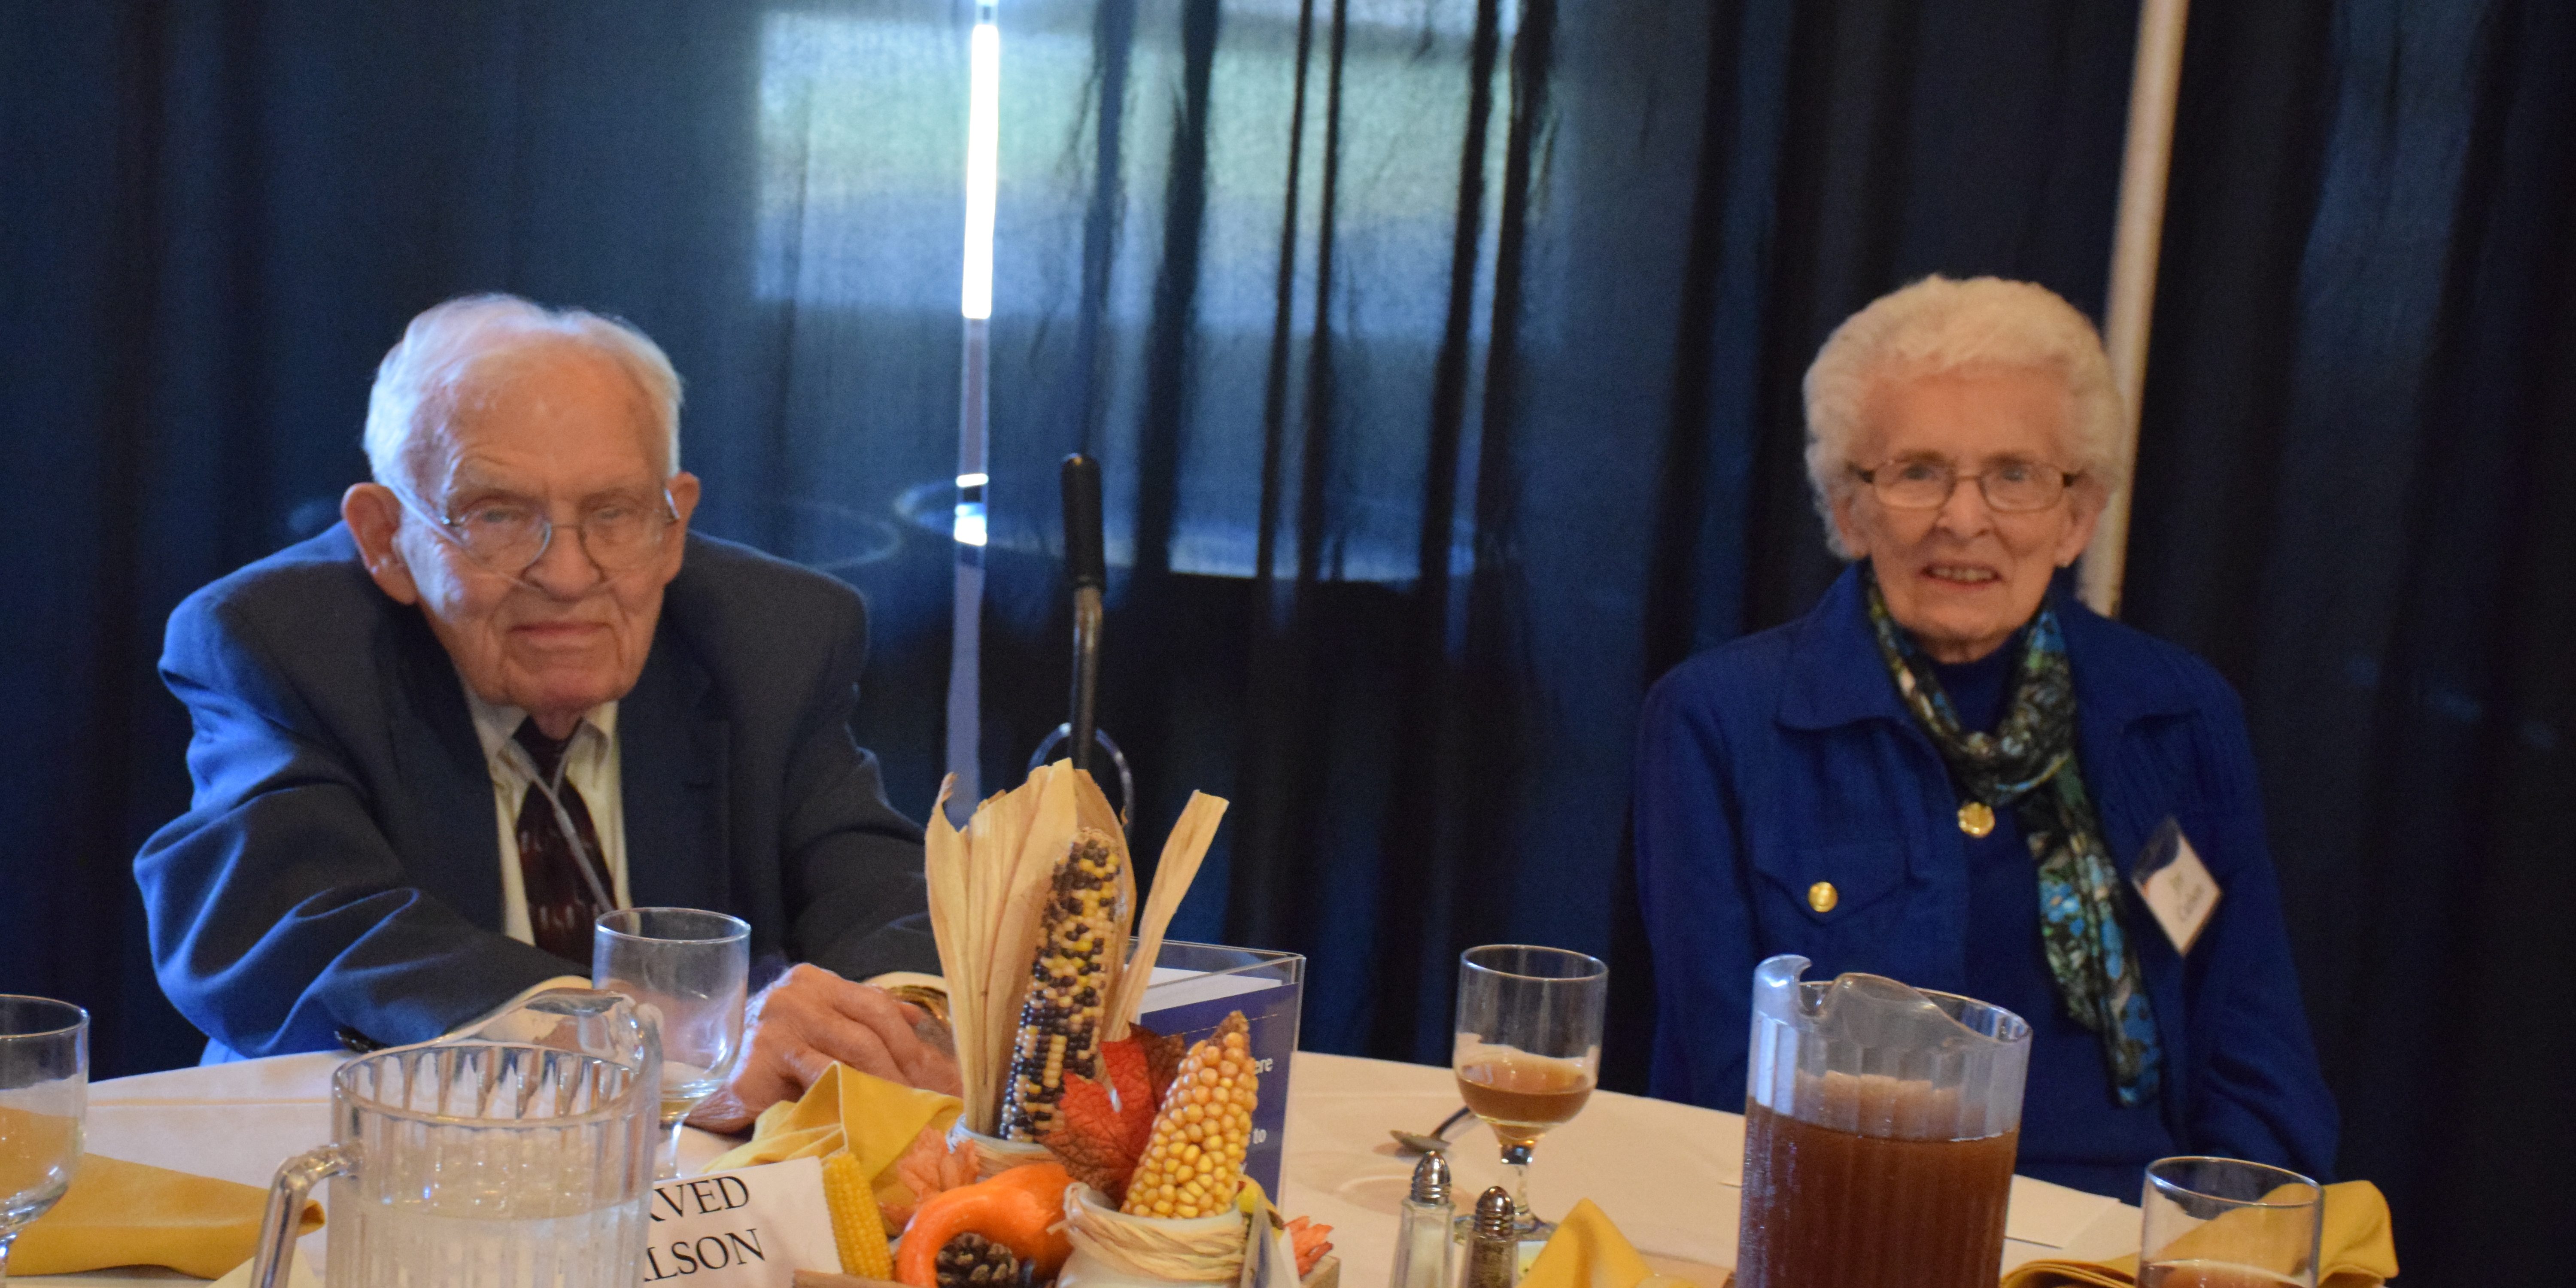 Neal and Joy Carlson were honored with the creation of the Neal and Joy Carlson Legacy Society.